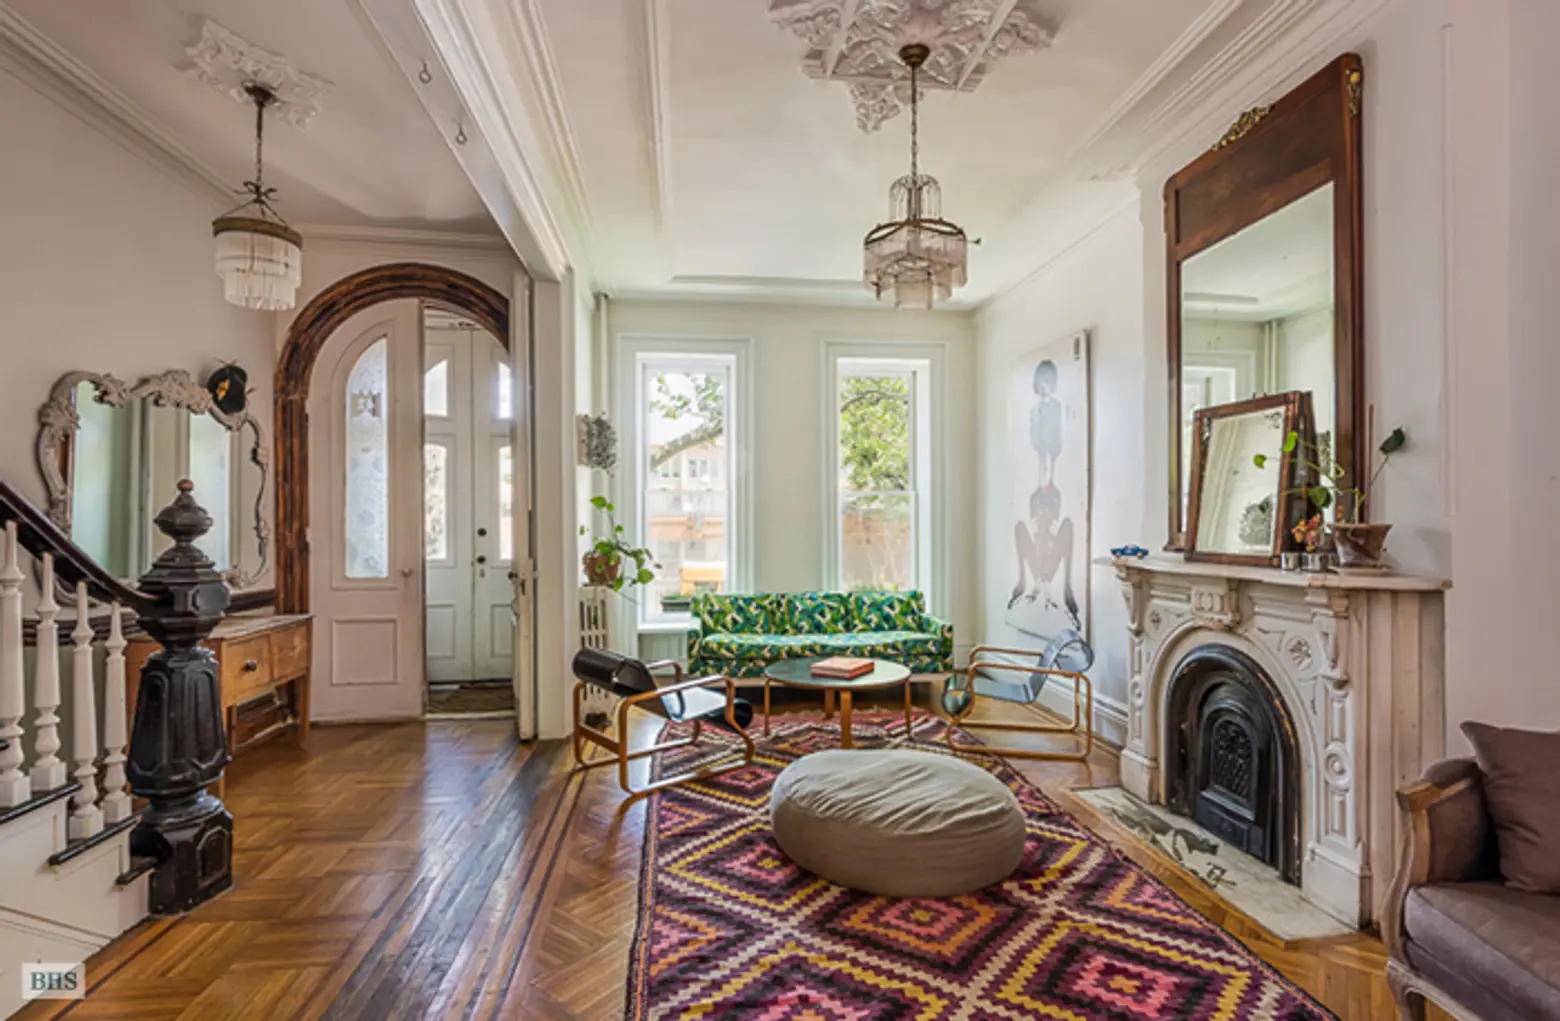 Spend Summer in a Classy Clinton Hill Brownstone for $10K (Chickens Not Included)